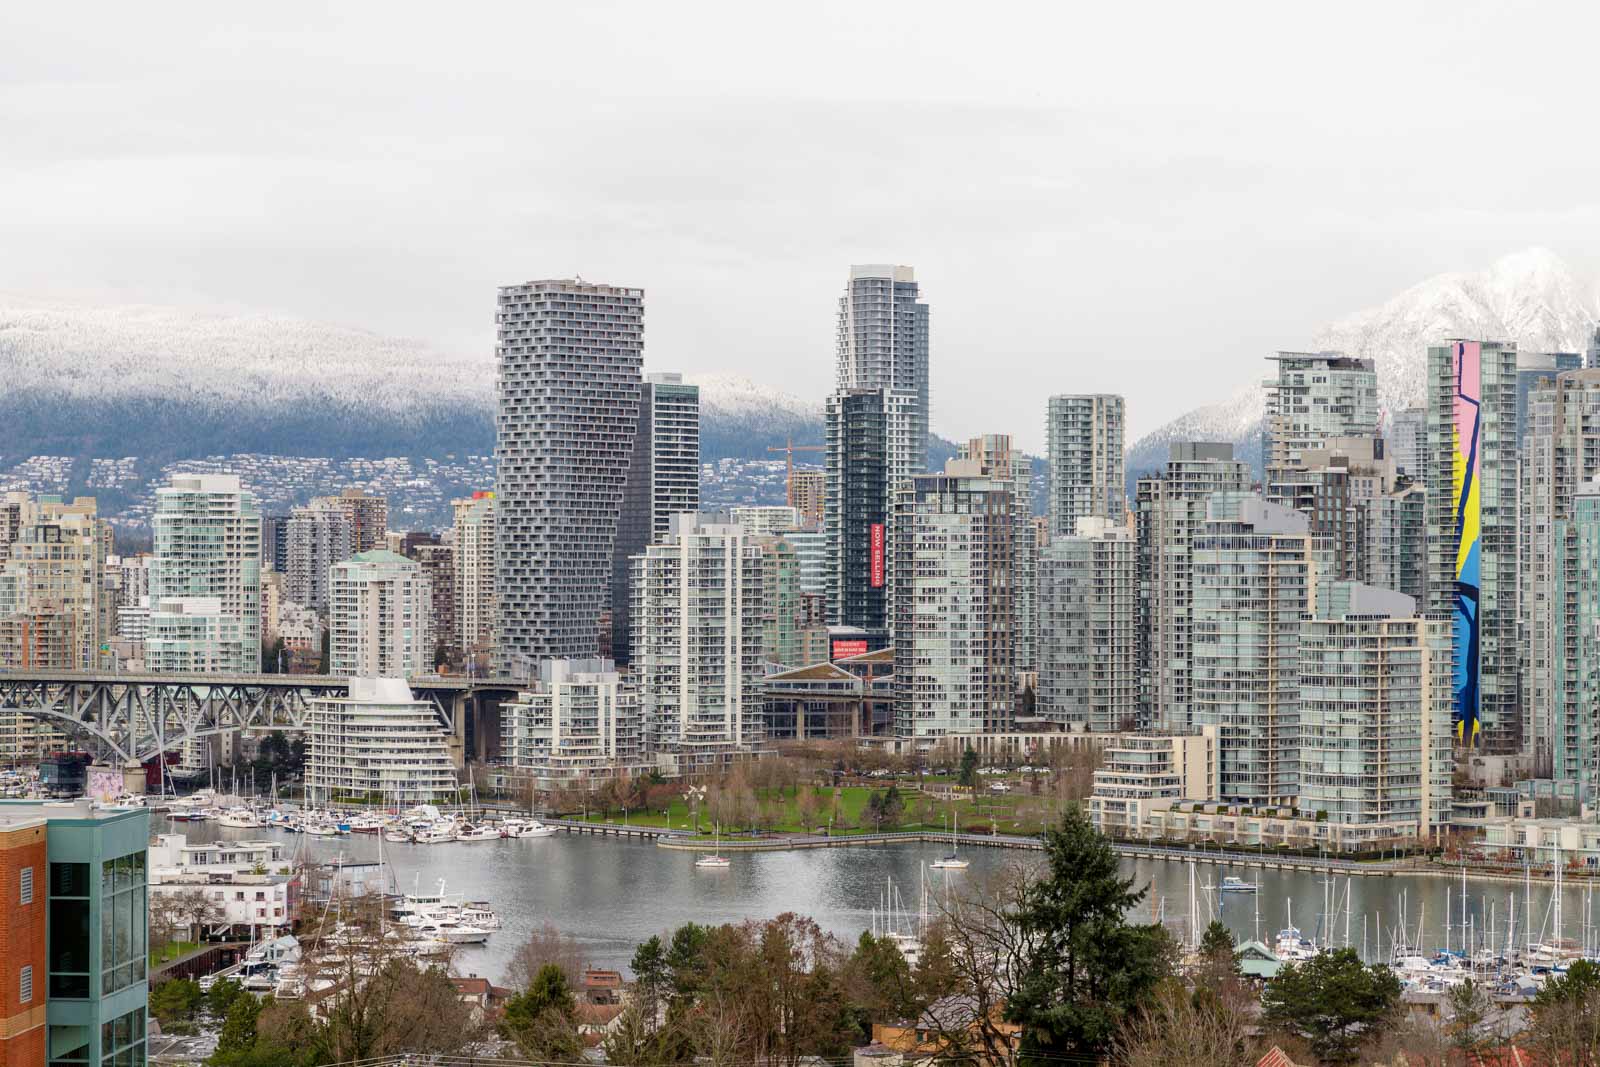 view from upscale condo in Vancouver's Fairview neighbourhood